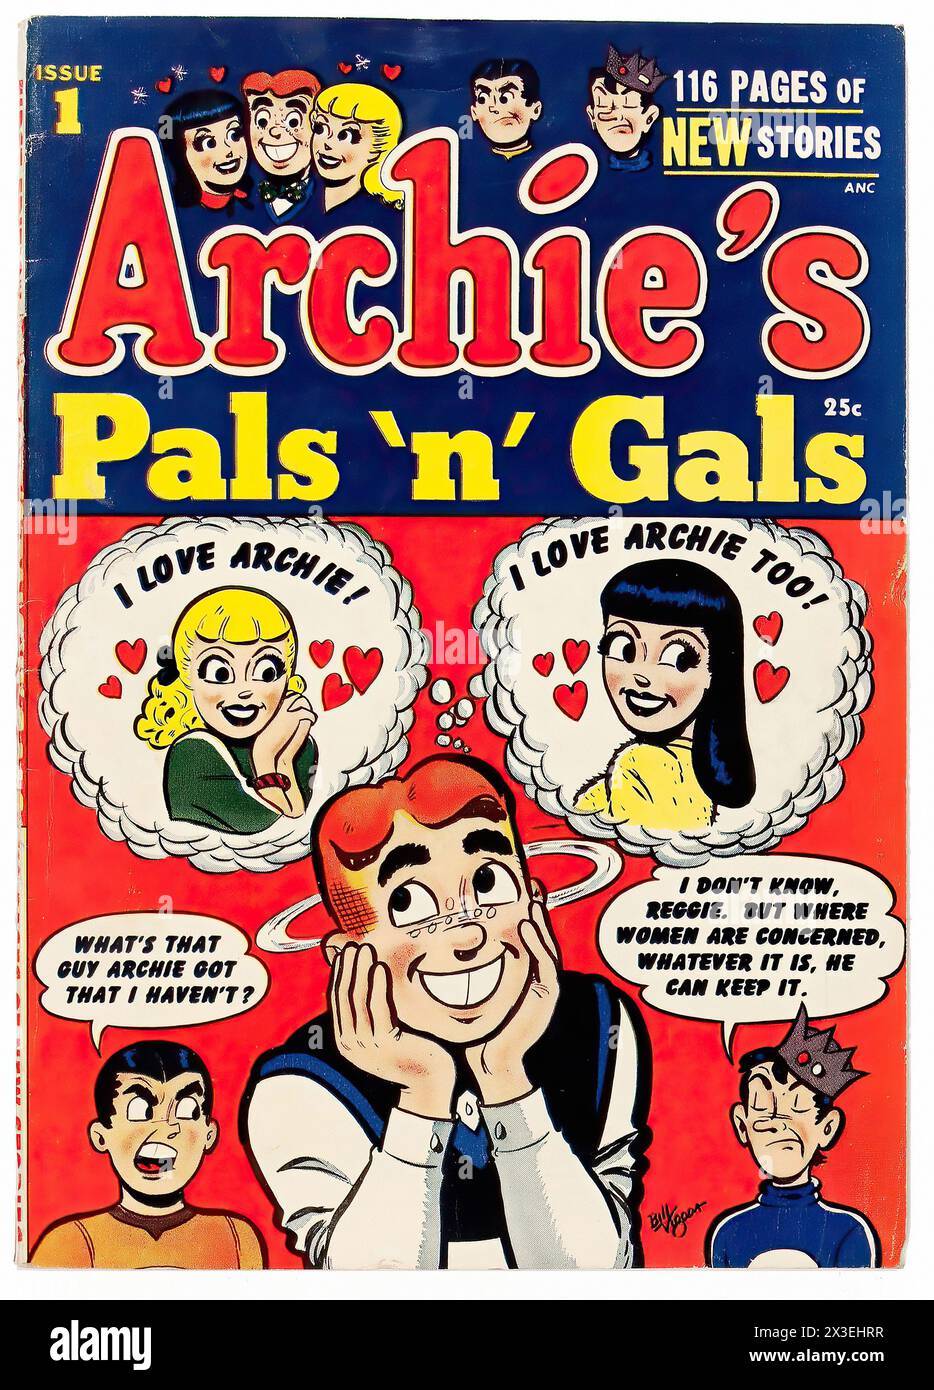 Archie's Pals 'n' Gals  - Vintage american illustrated publication cover Stock Photo